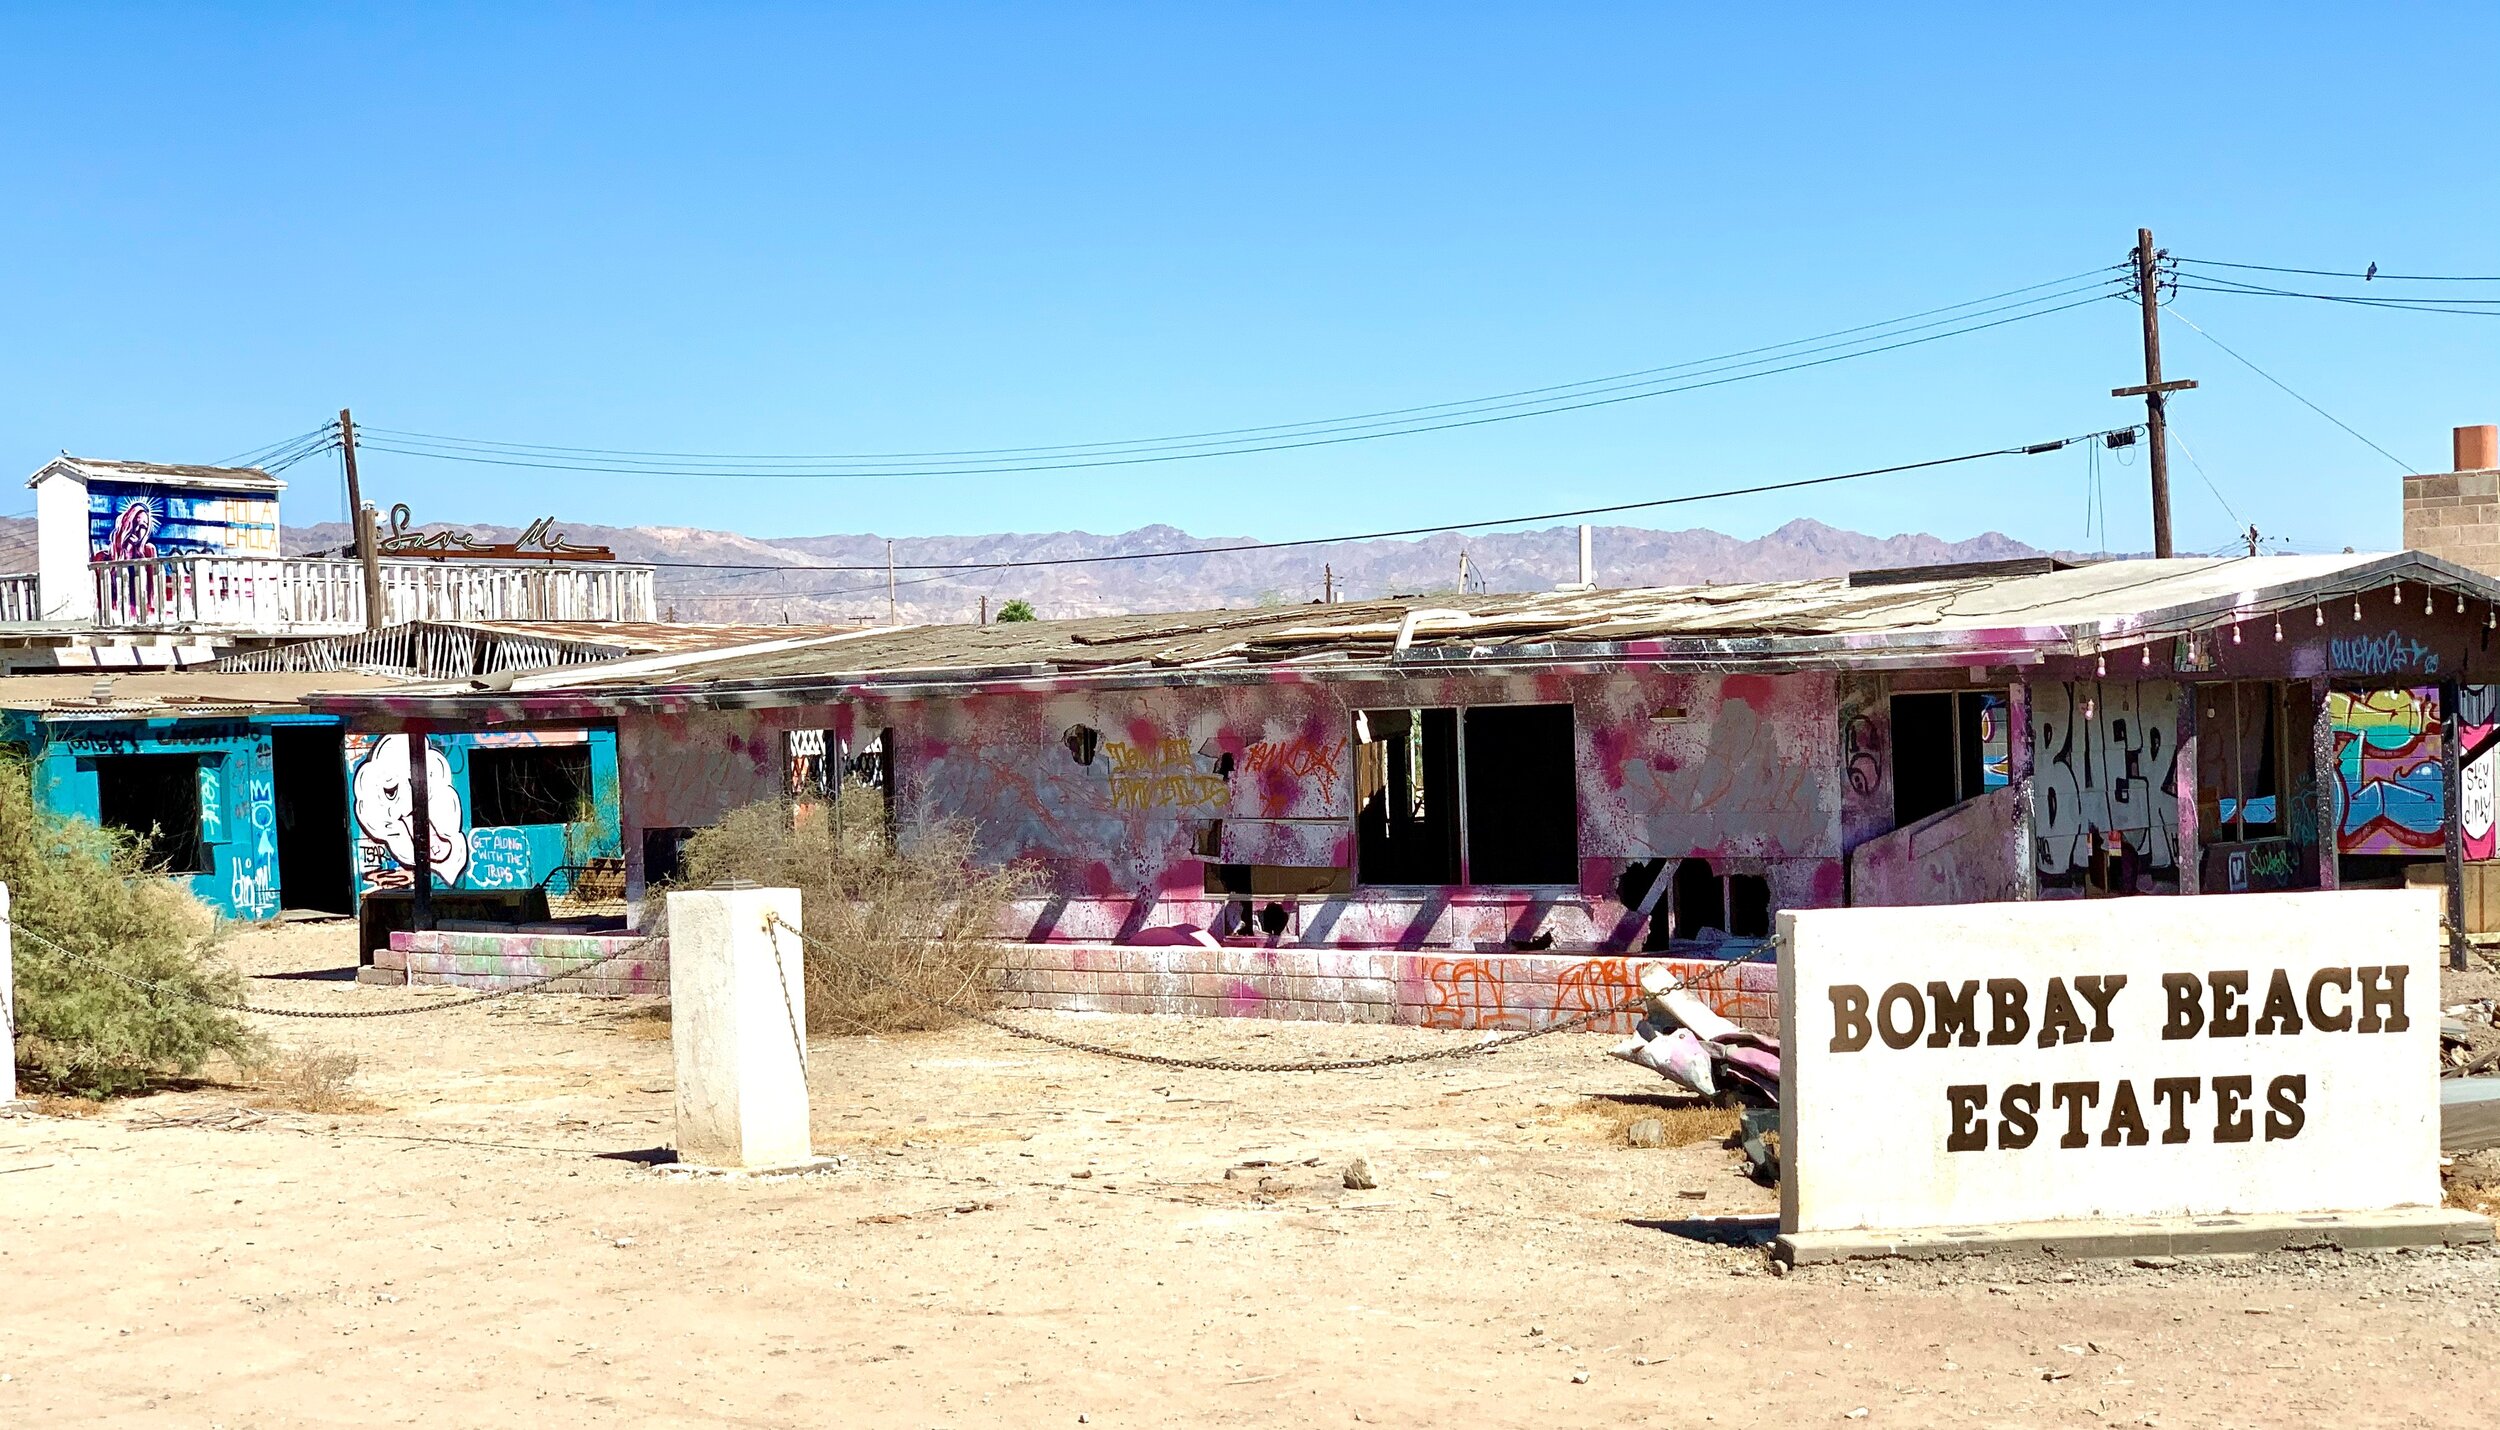  In its heyday, Bing Crosby and The Beach Boys entertained here, but in recent years Salton Sea’s only notable celebrity visit was from Anthony Bourdain, who featured the area on  Parts Unknown . And by the way, it still smells terrible here. One vlo